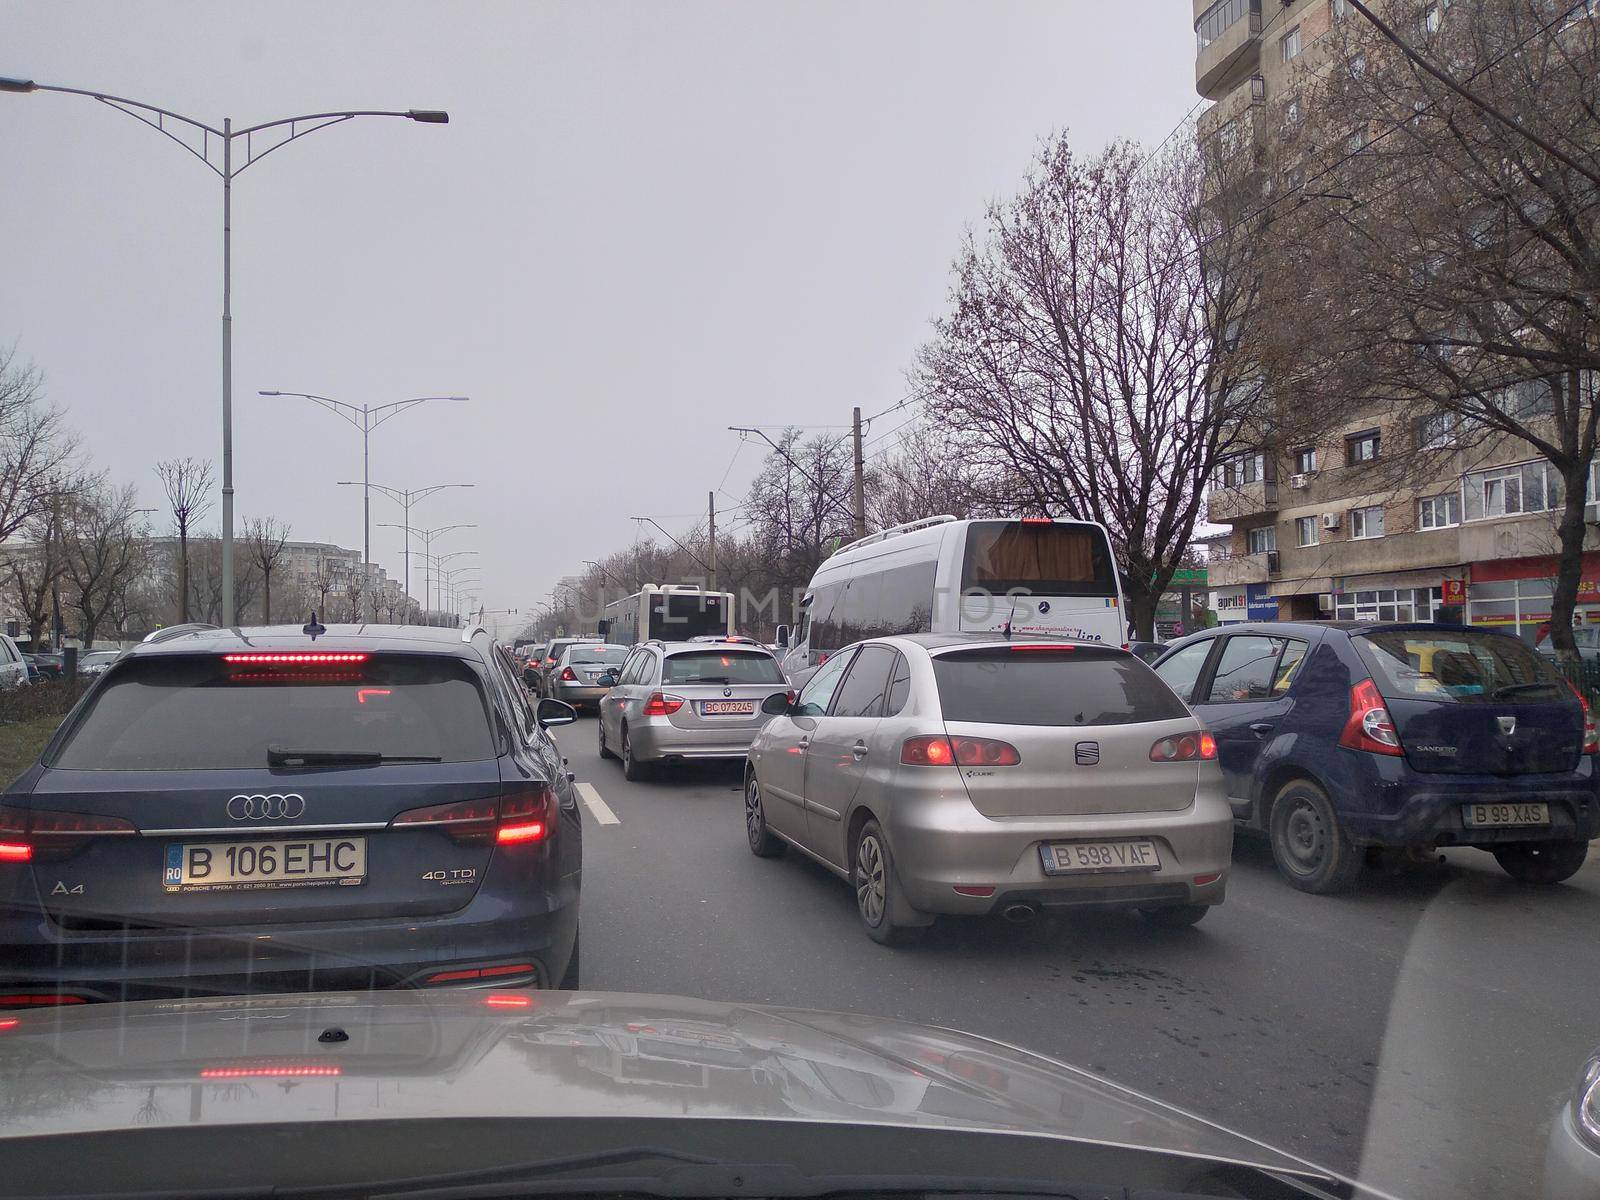 Road view through car windshield, cars on road in traffic in Bucharest, Romania, 2021